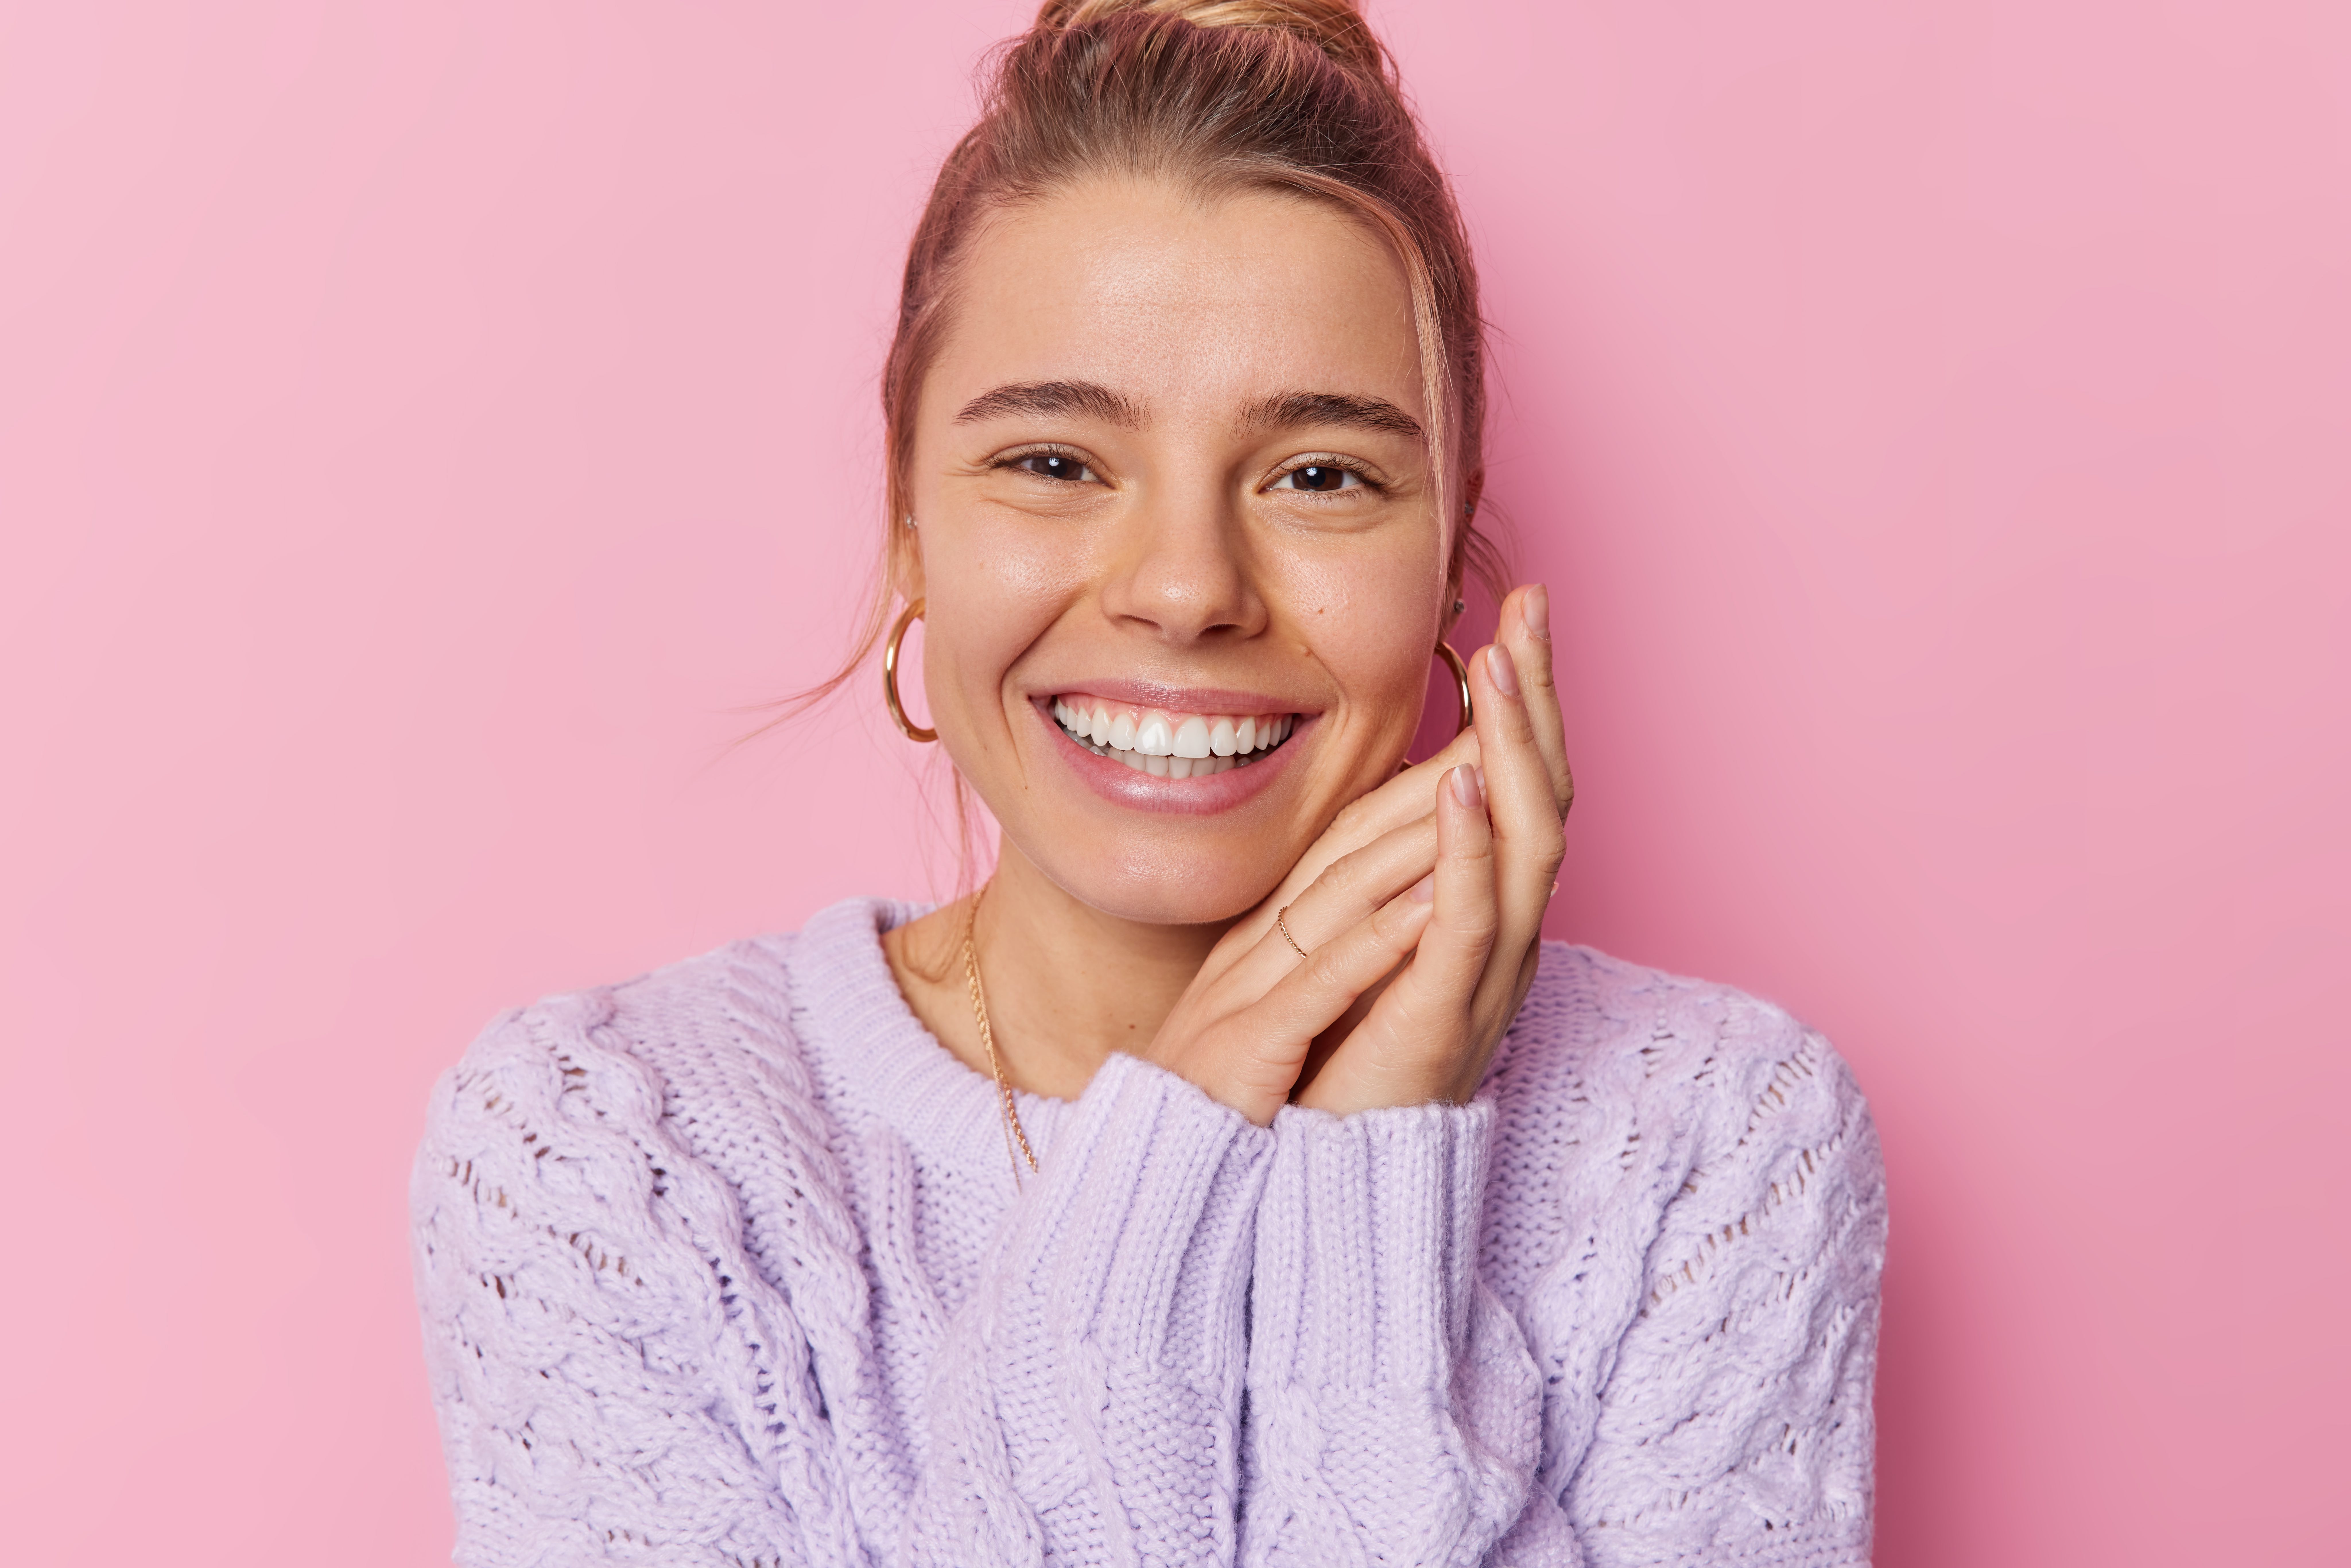 portrait-lovely-young-woman-smiles-toothily-keeps-hands-near-face-looks-glad-wears-purple-knitted-sweater-earrings-poses-against-pink-background-happy-emotions-face-expressions-concept